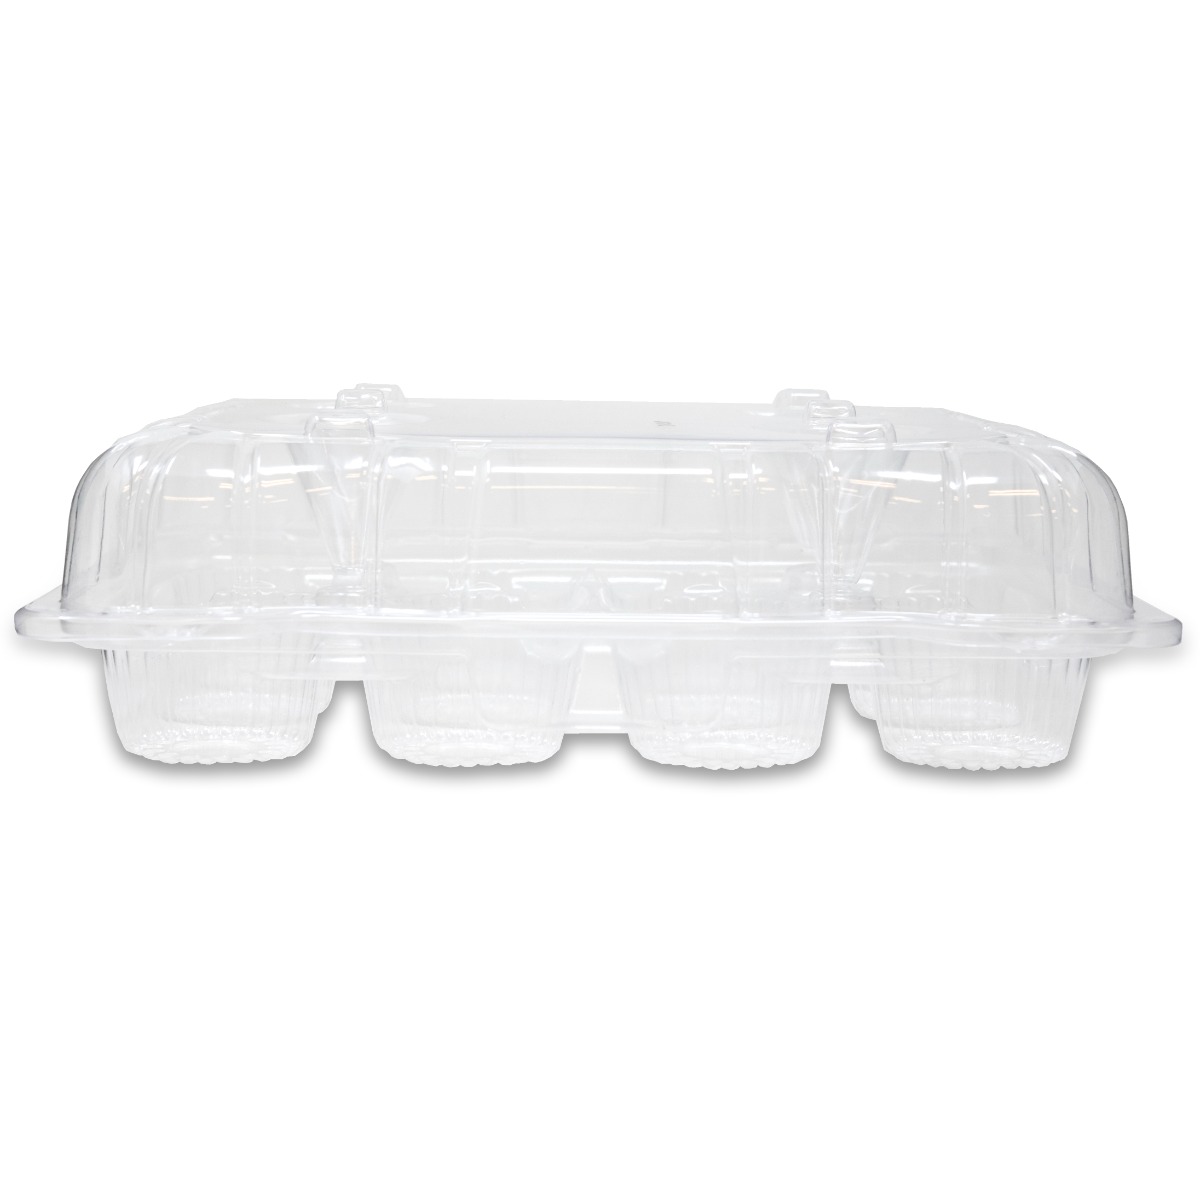 InnoPak 2 Compartment Clear Hinged Cupcake / Muffin Container - 24